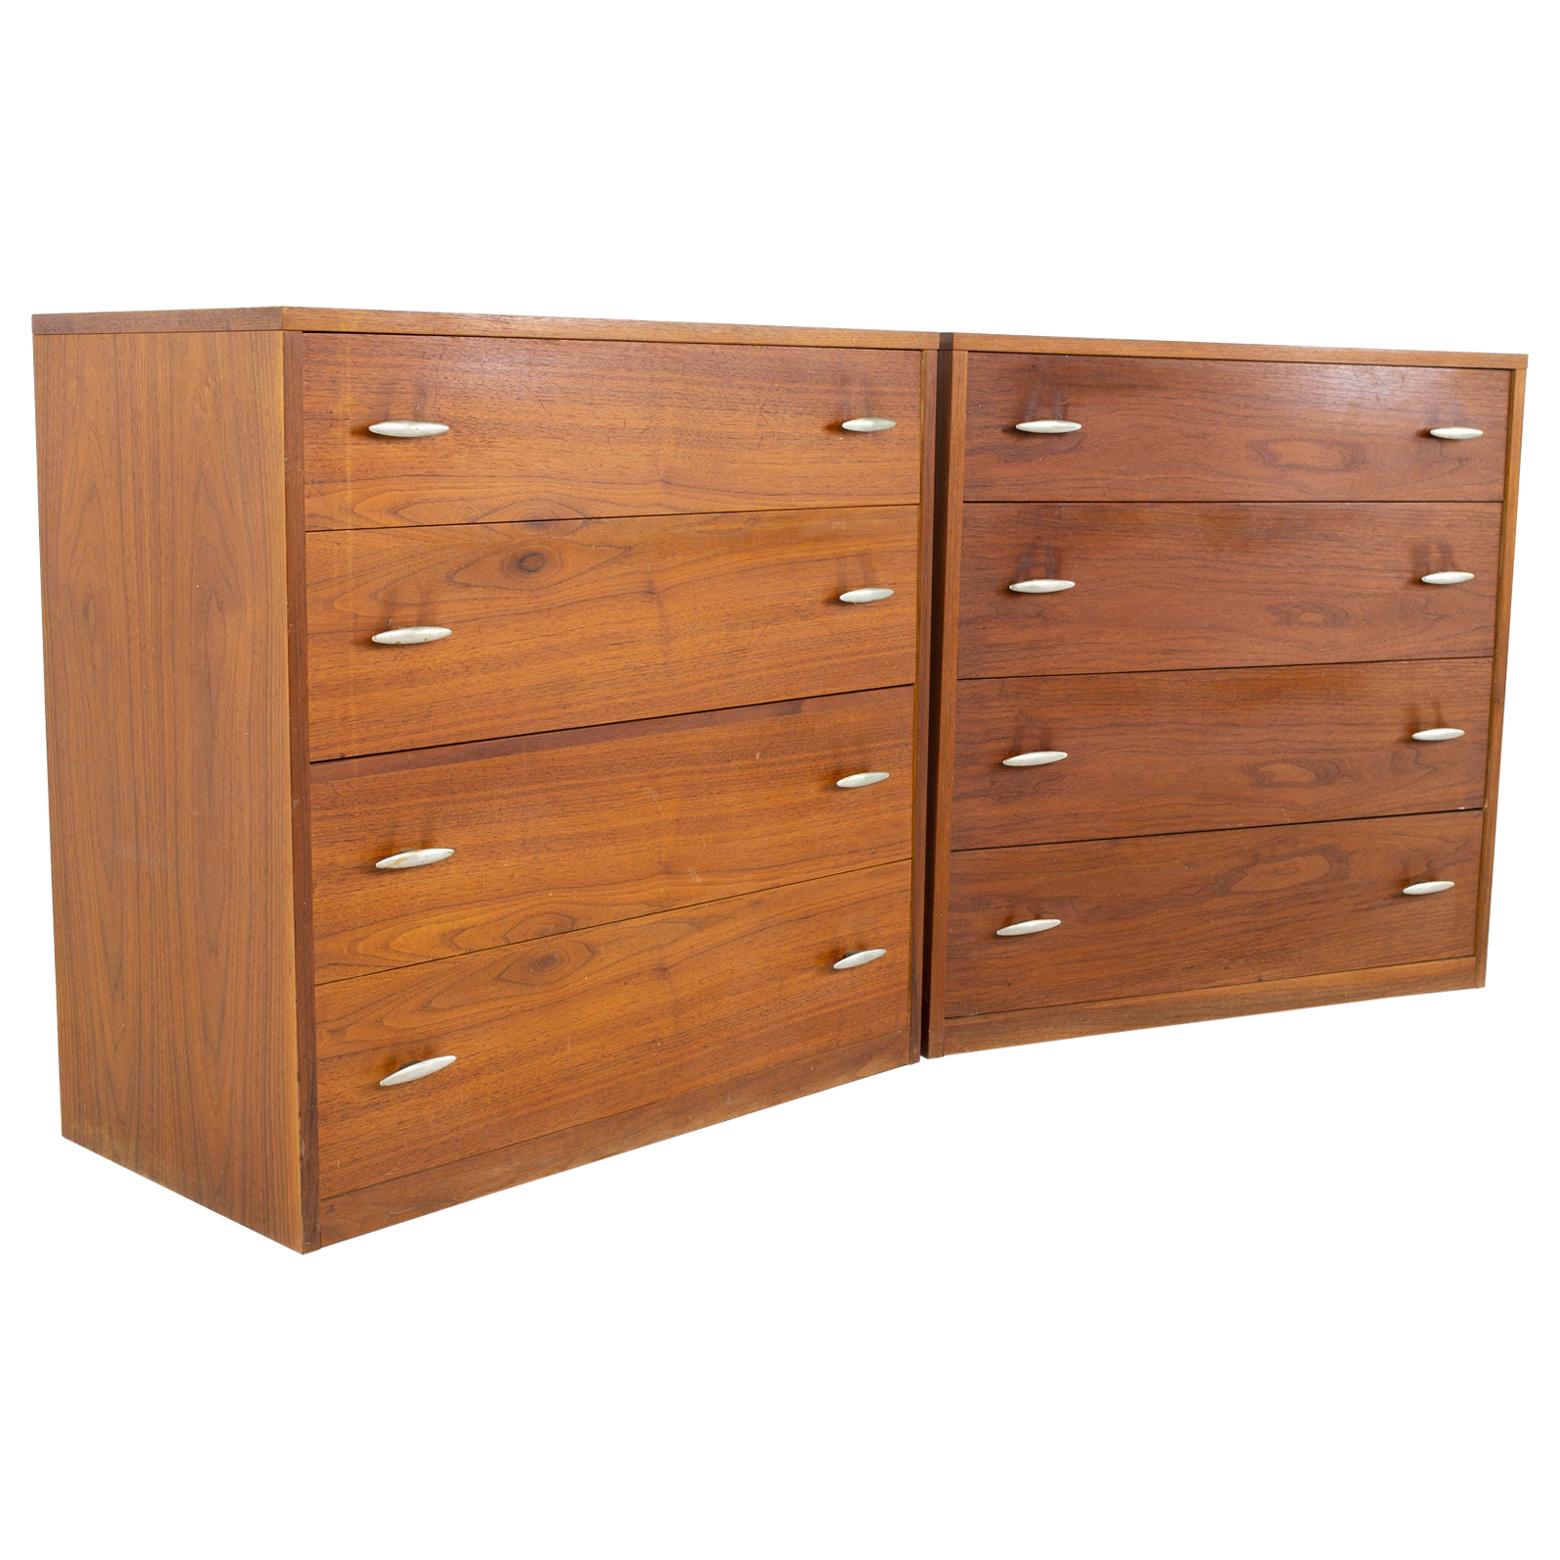 Crescent Furniture Company MCM Walnut and Stainless Dresser Chests - Pair